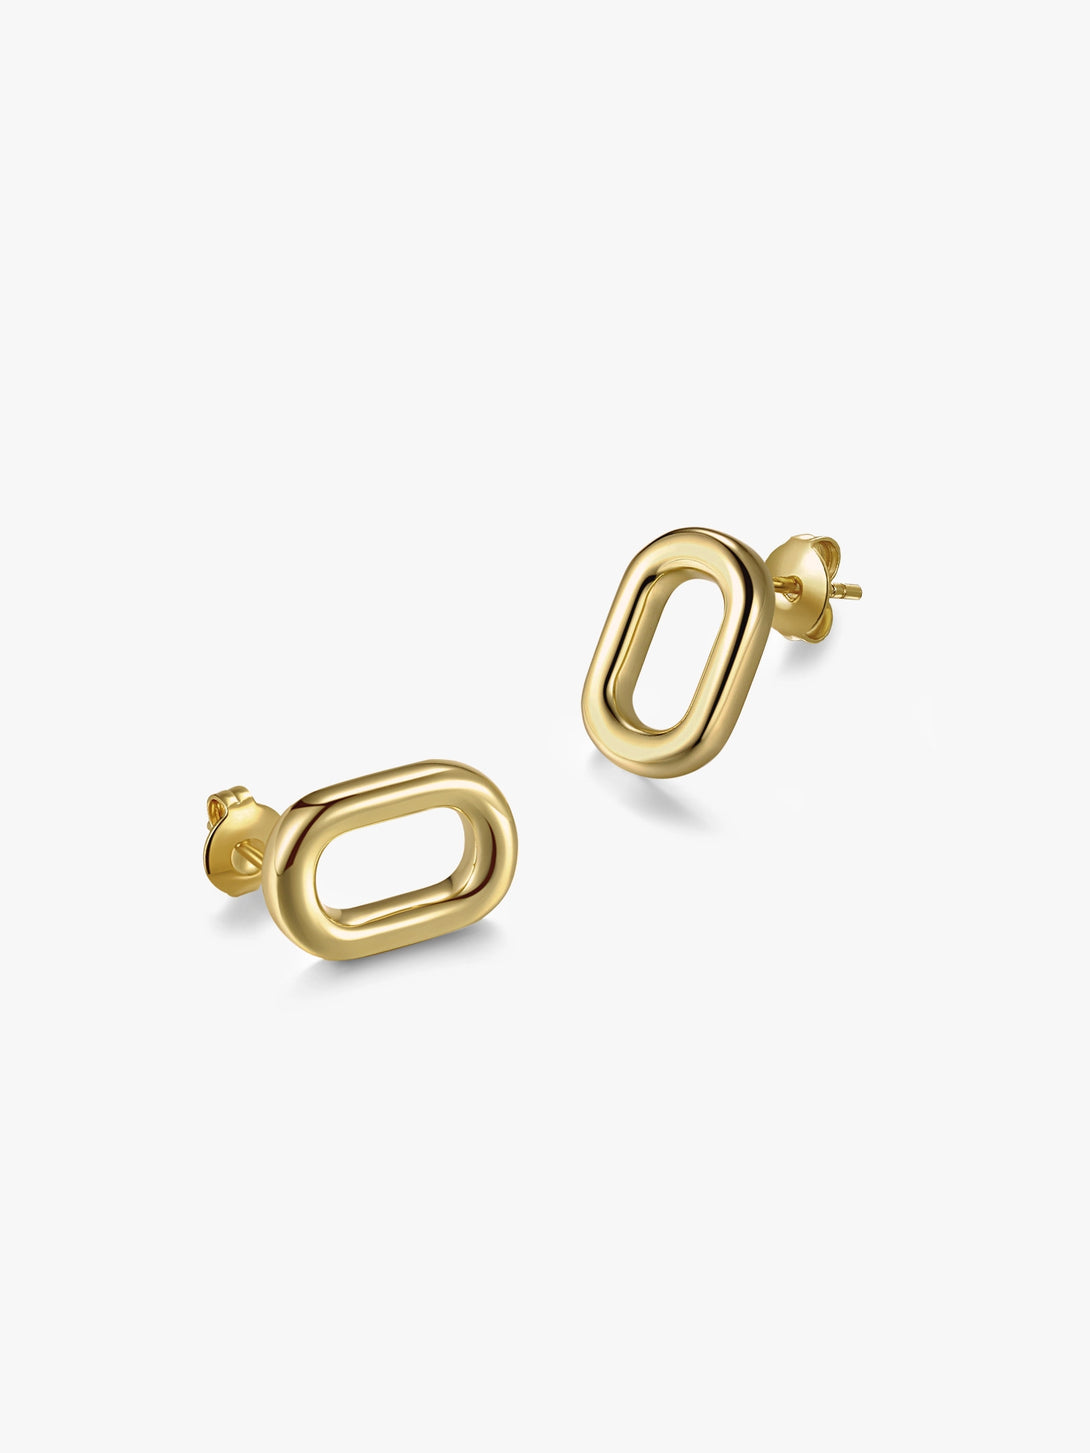 Classical Oval Stud Earrings - OOTDY